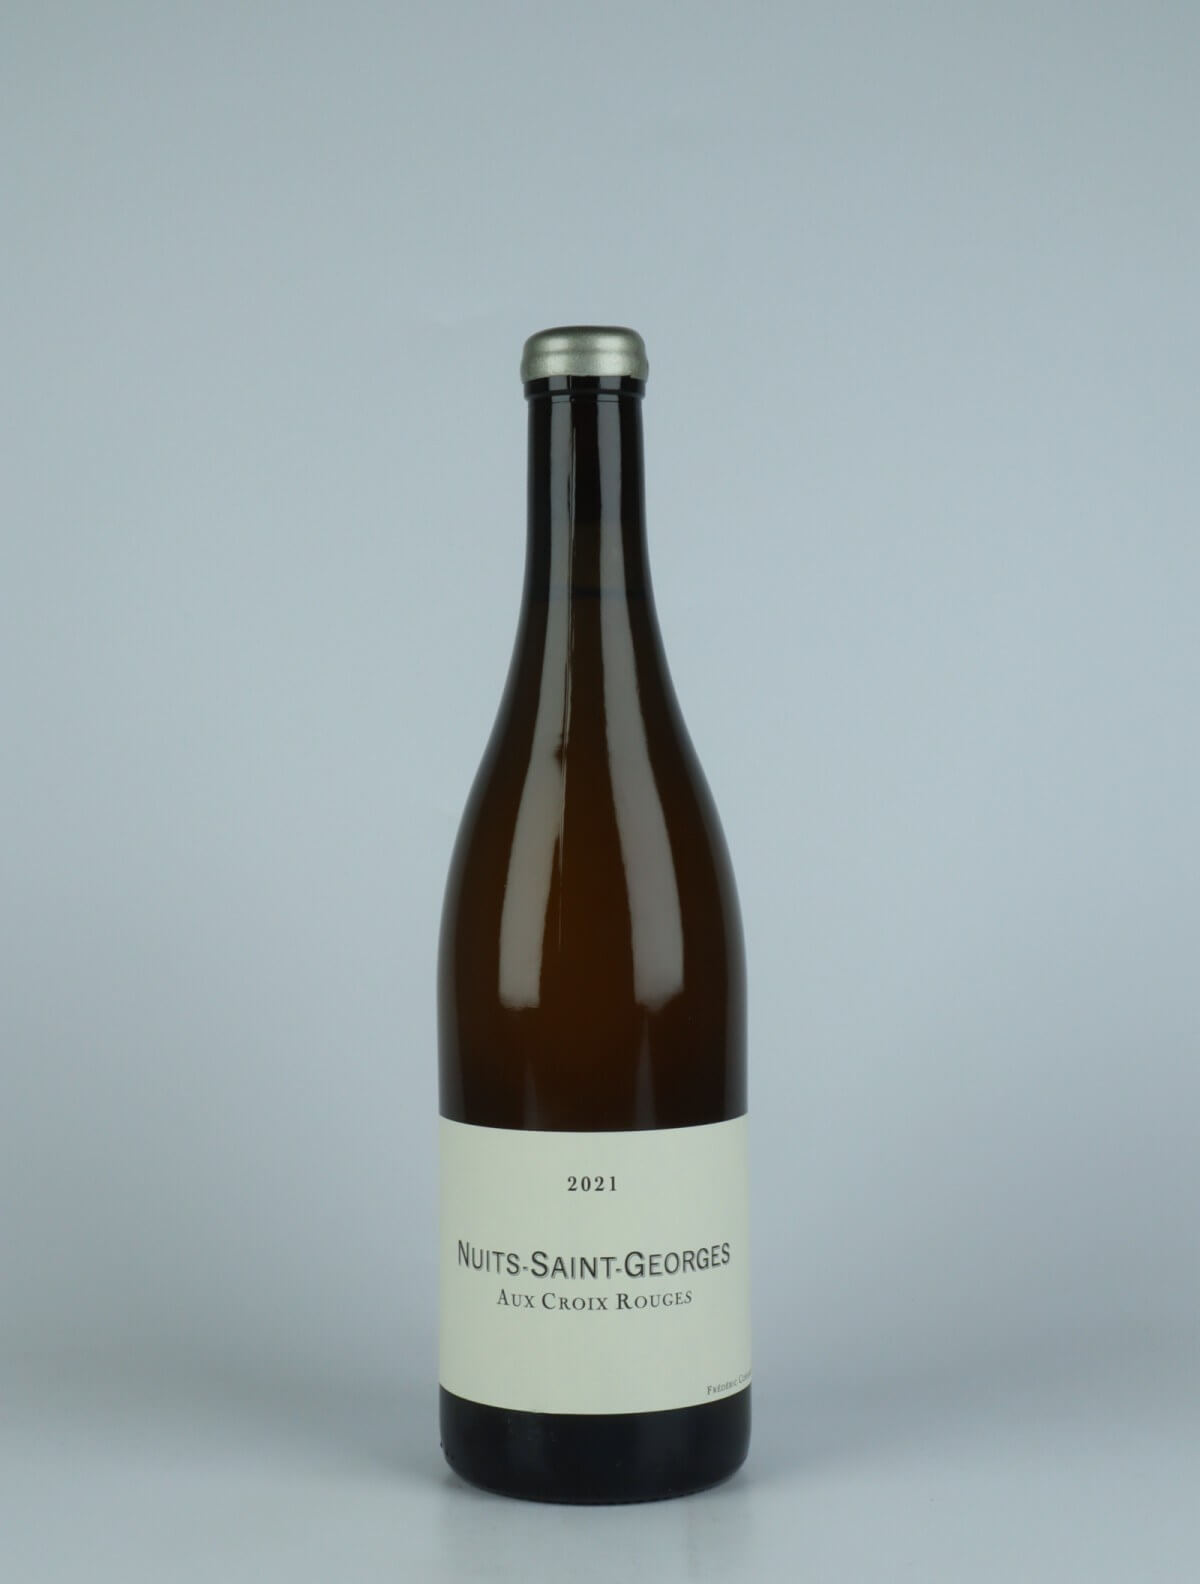 A bottle 2021 Nuits Saint Georges - Aux Croix Rouges White wine from Frédéric Cossard, Burgundy in France